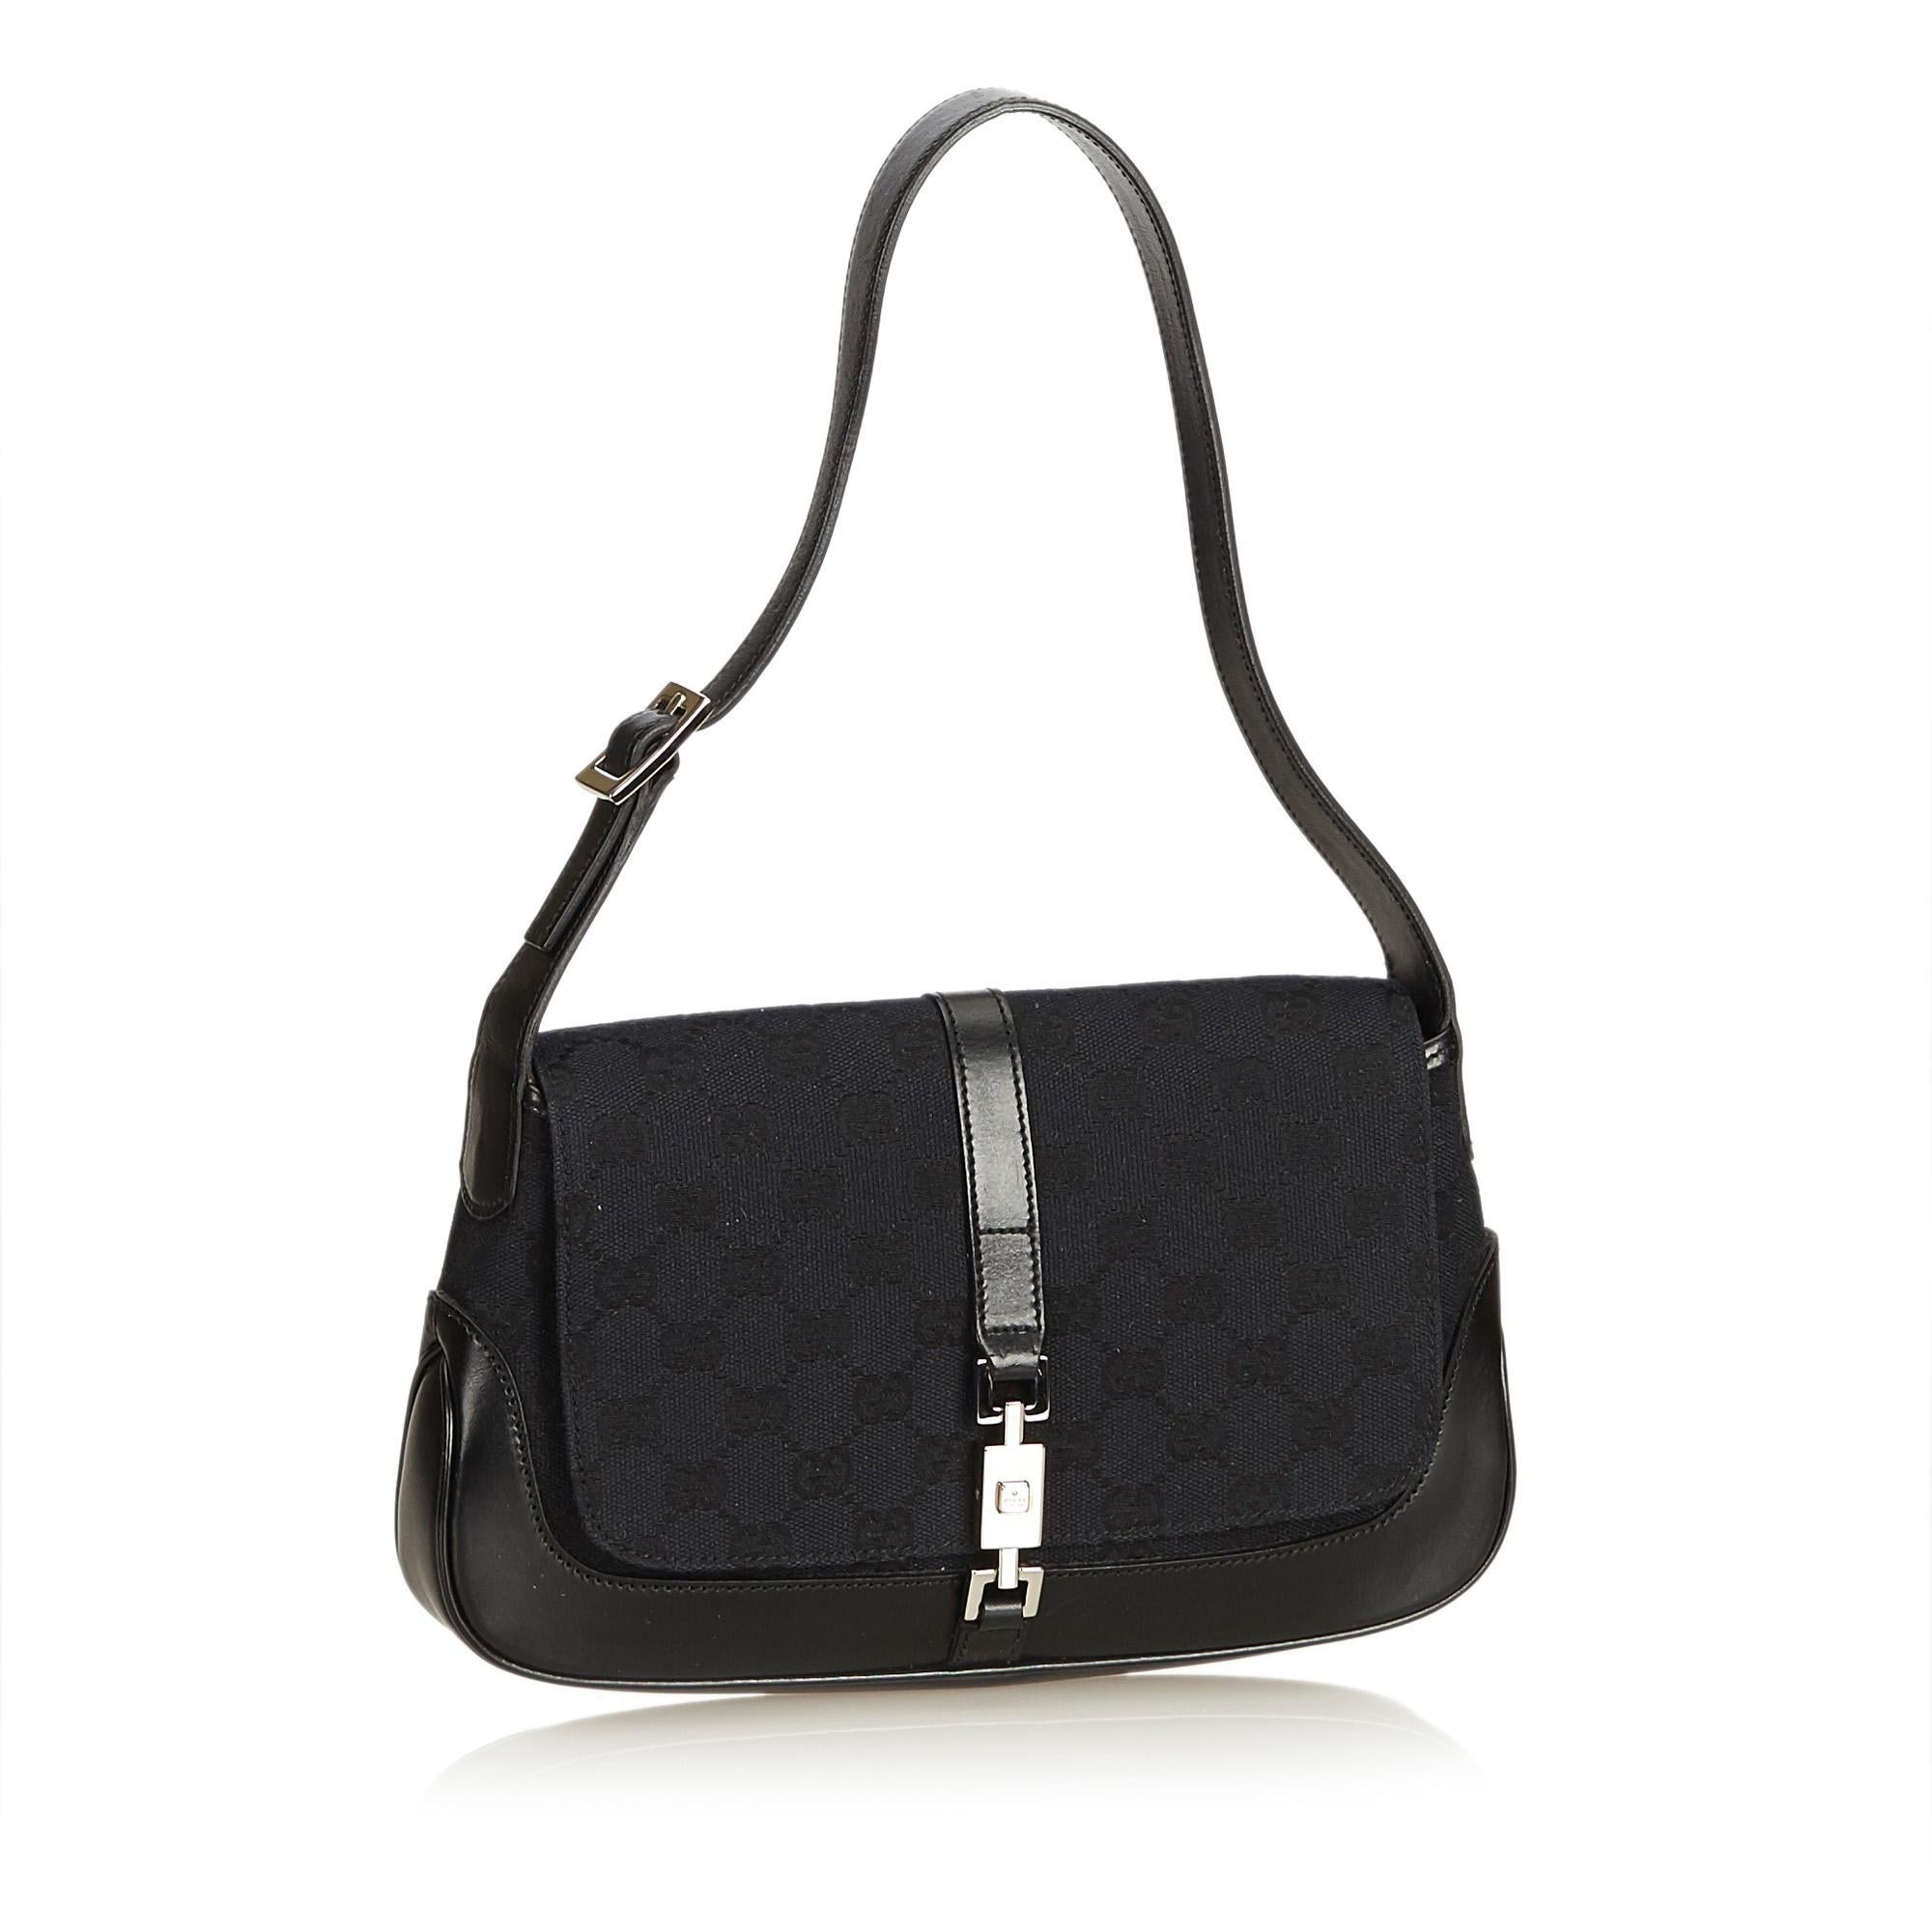 This Jackie features a jacquard body with leather trim, flat leather strap, front flap with flat strap and push lock closure and interior zip pocket. It carries as AB condition rating.

Inclusions: 
Dust Bag

Dimensions:
Length: 17.00 cm
Width: